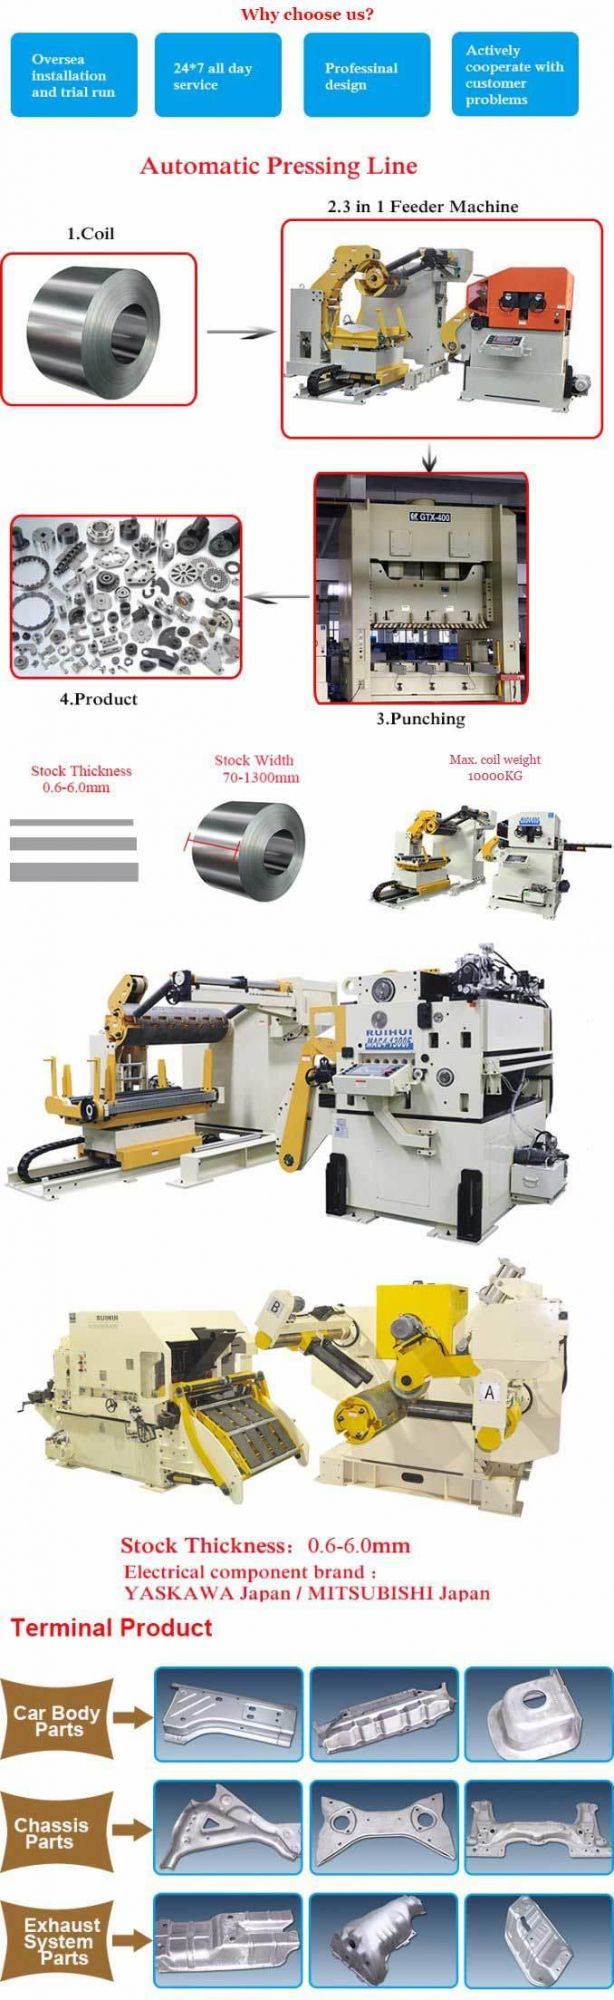 Coil Sheet Automatic Feeder with Straightener and Uncoiler in Press Line, Hot Press Dray Machine, Feeding Line